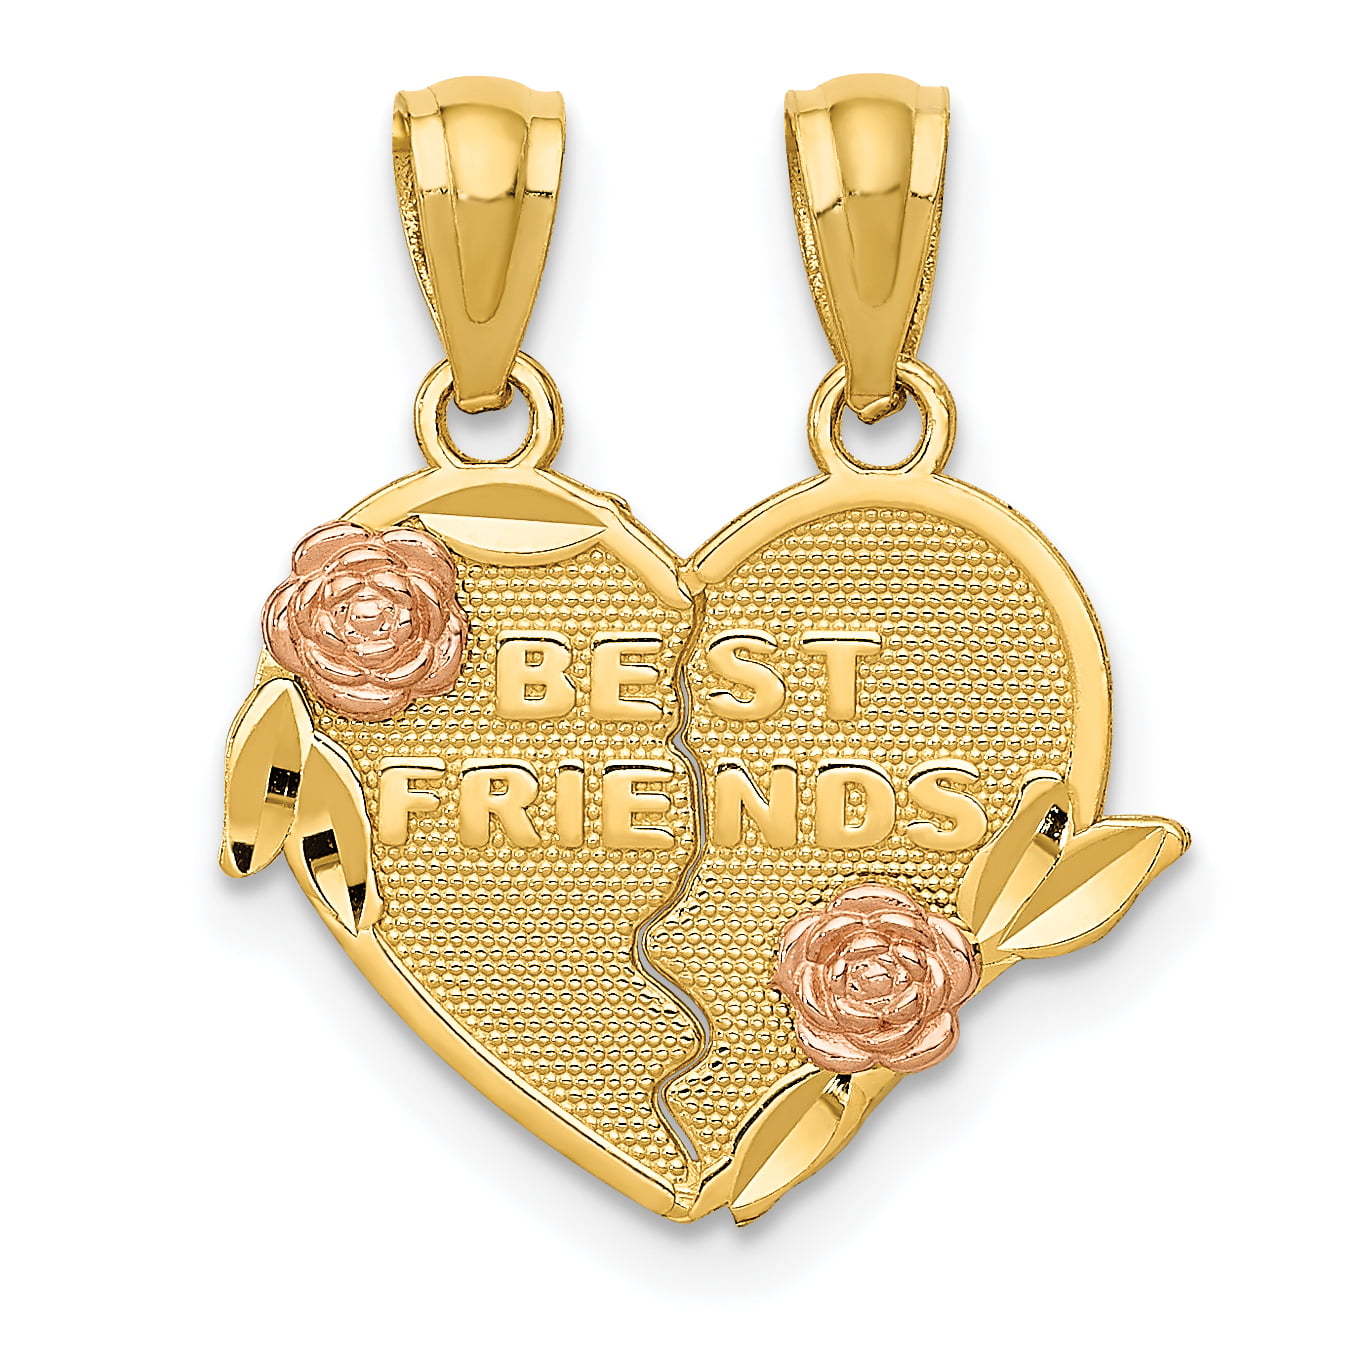 Waffle and Pancake bff charm valentines gift